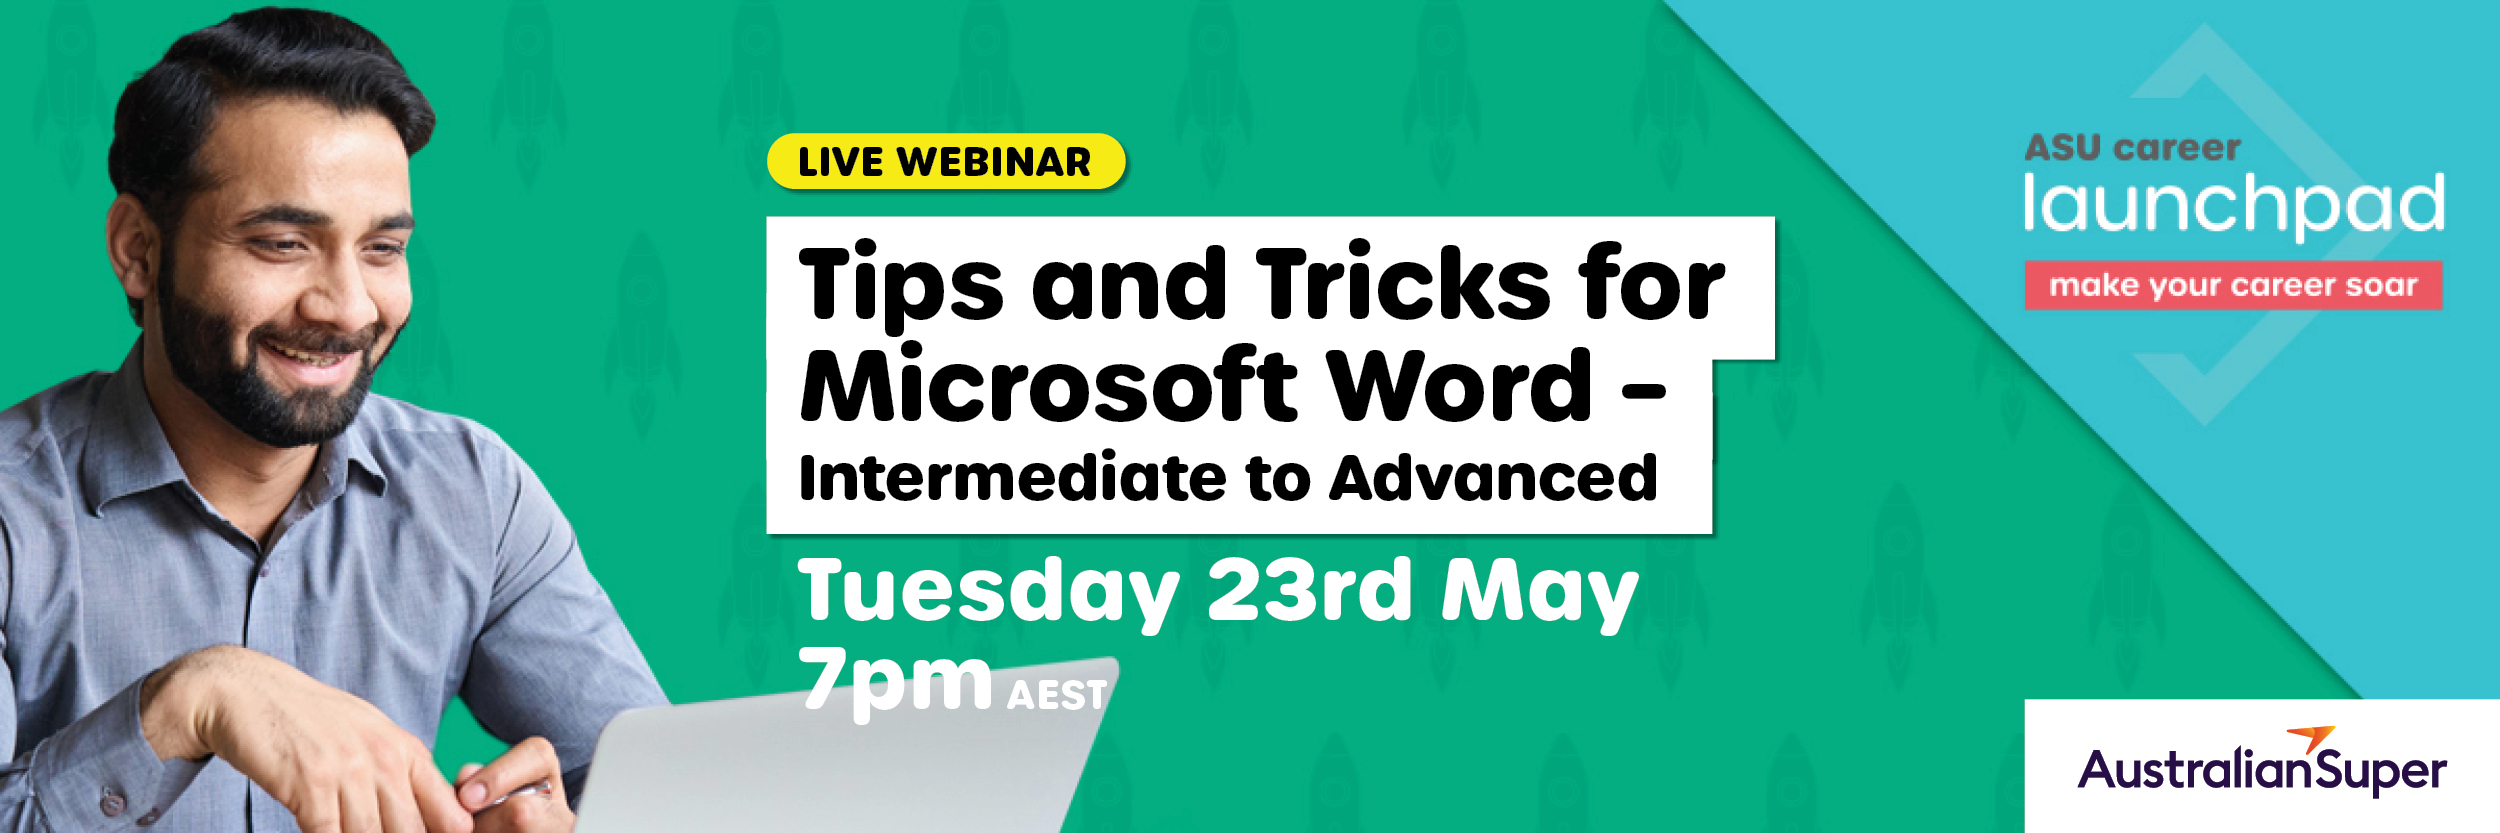 Tips and tricks for Microsoft Word - Intermediate to Advanced. Tuesday 23 May 7:00pm